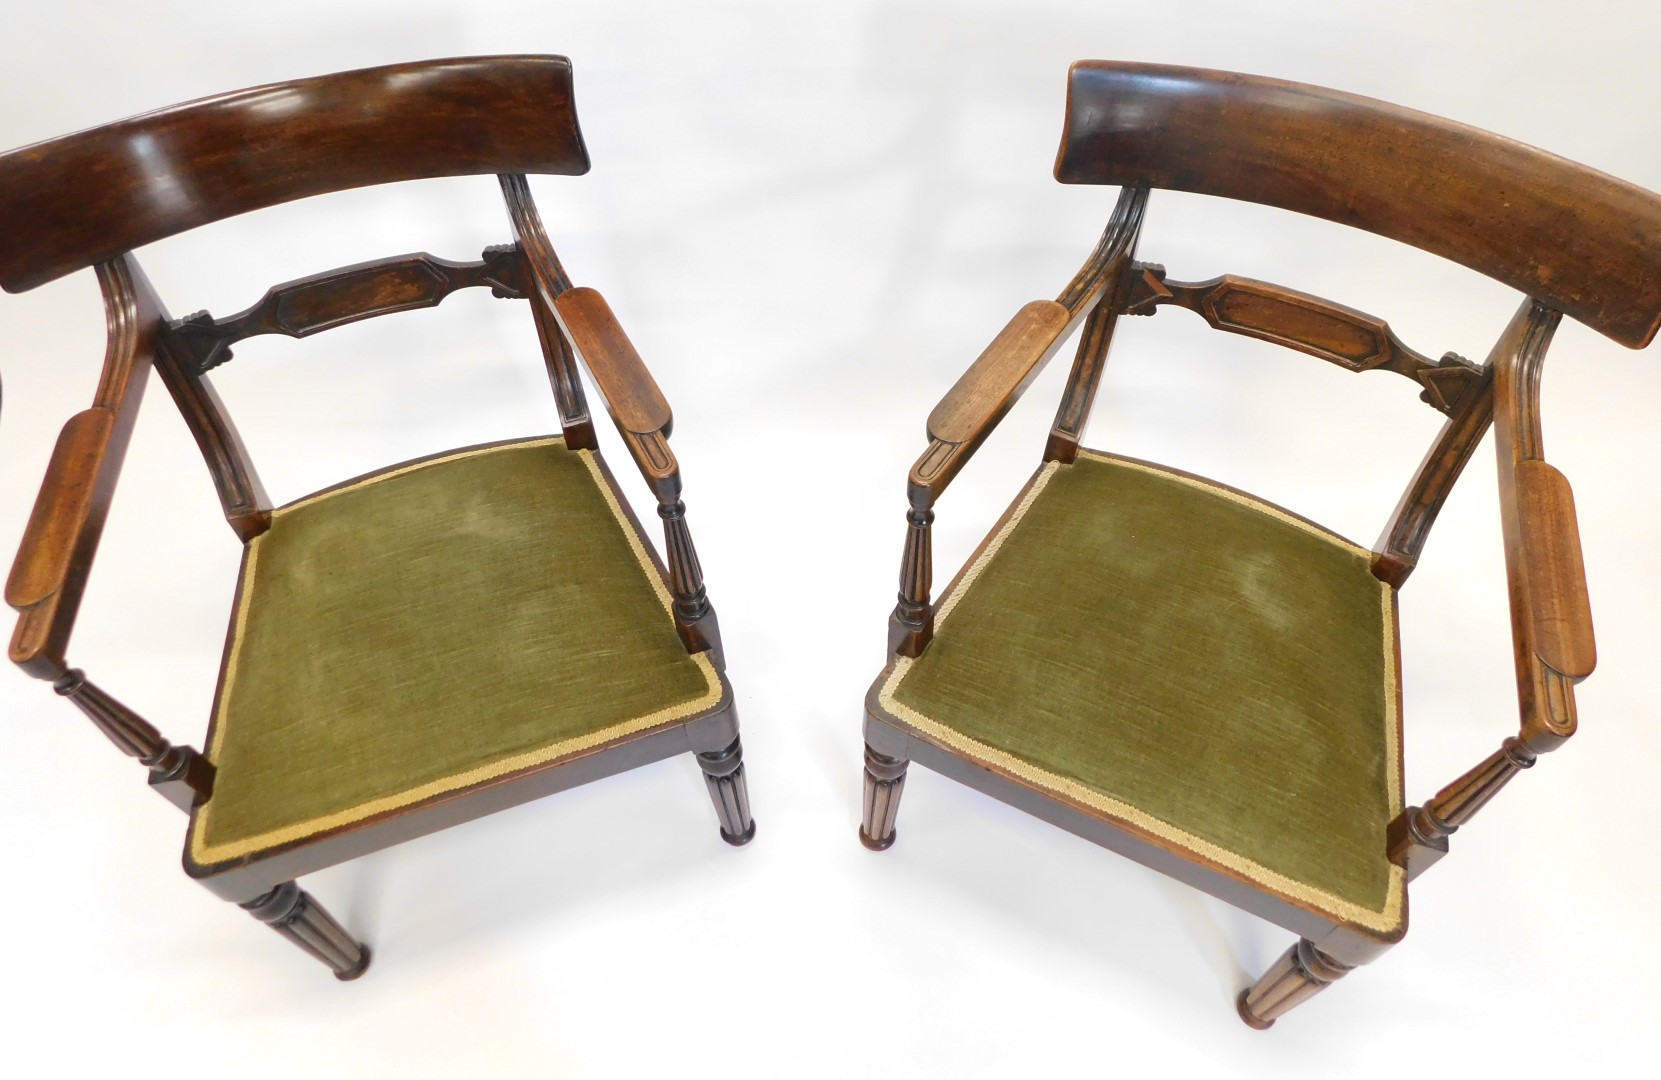 A pair of 19thC mahogany armchairs, each with a bar back, shaped arm supports, and a padded seat wit - Image 2 of 3